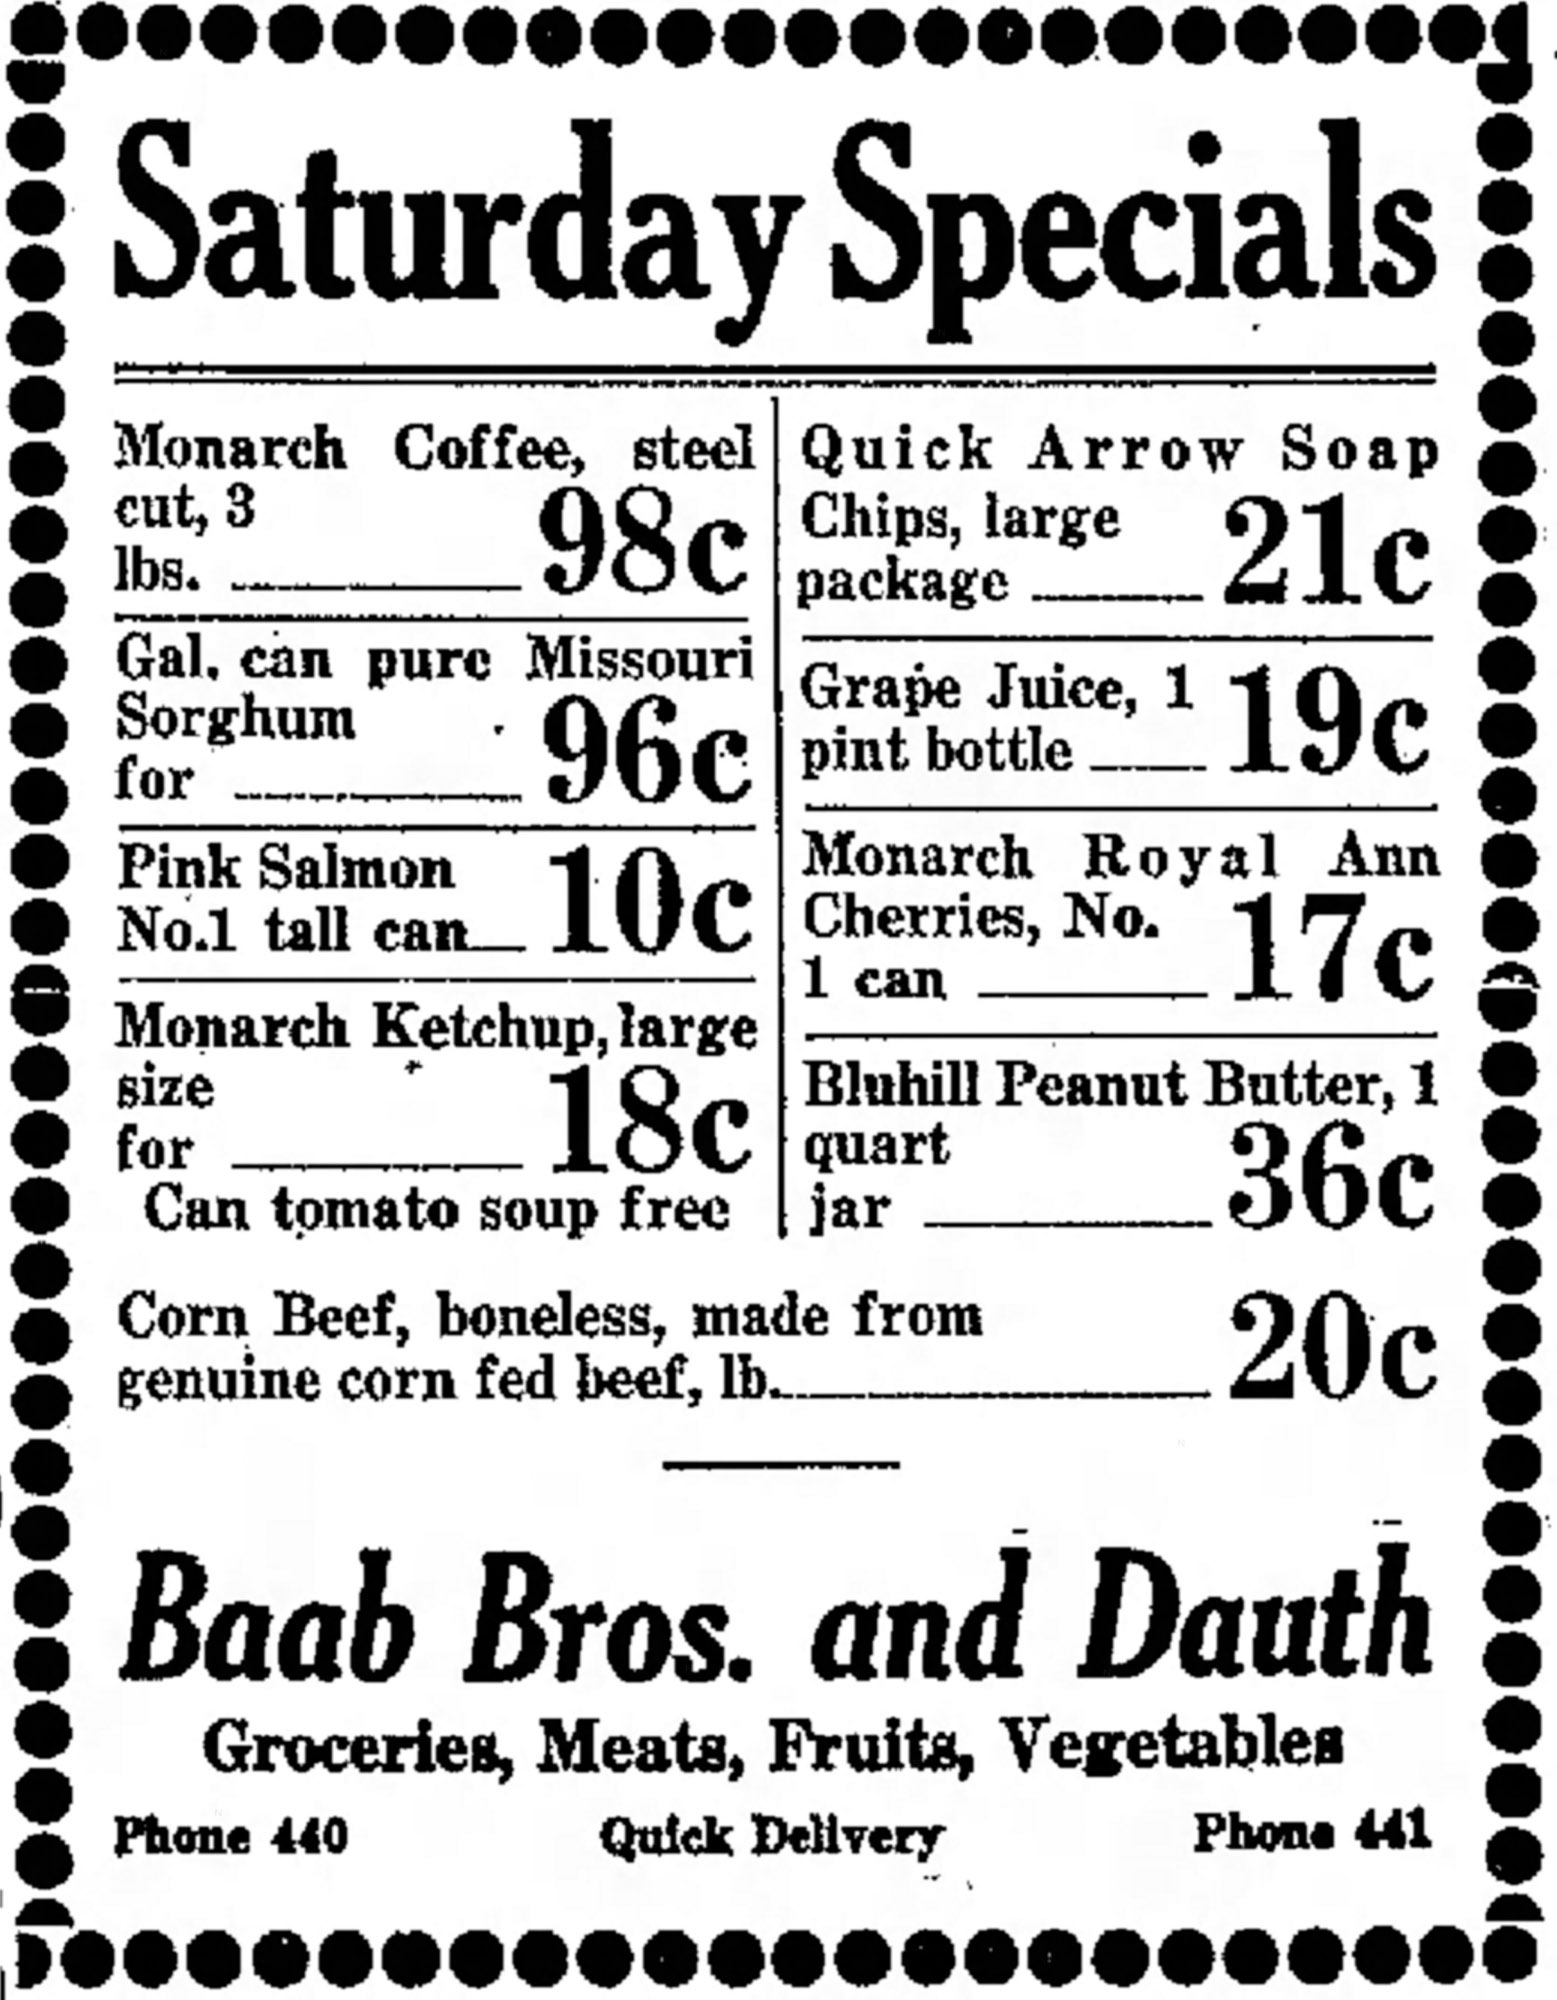 Dauth Family Archive - 1932-01-08 - Greeley Daily Tribune - Baab Bros and Dauth Advertisement